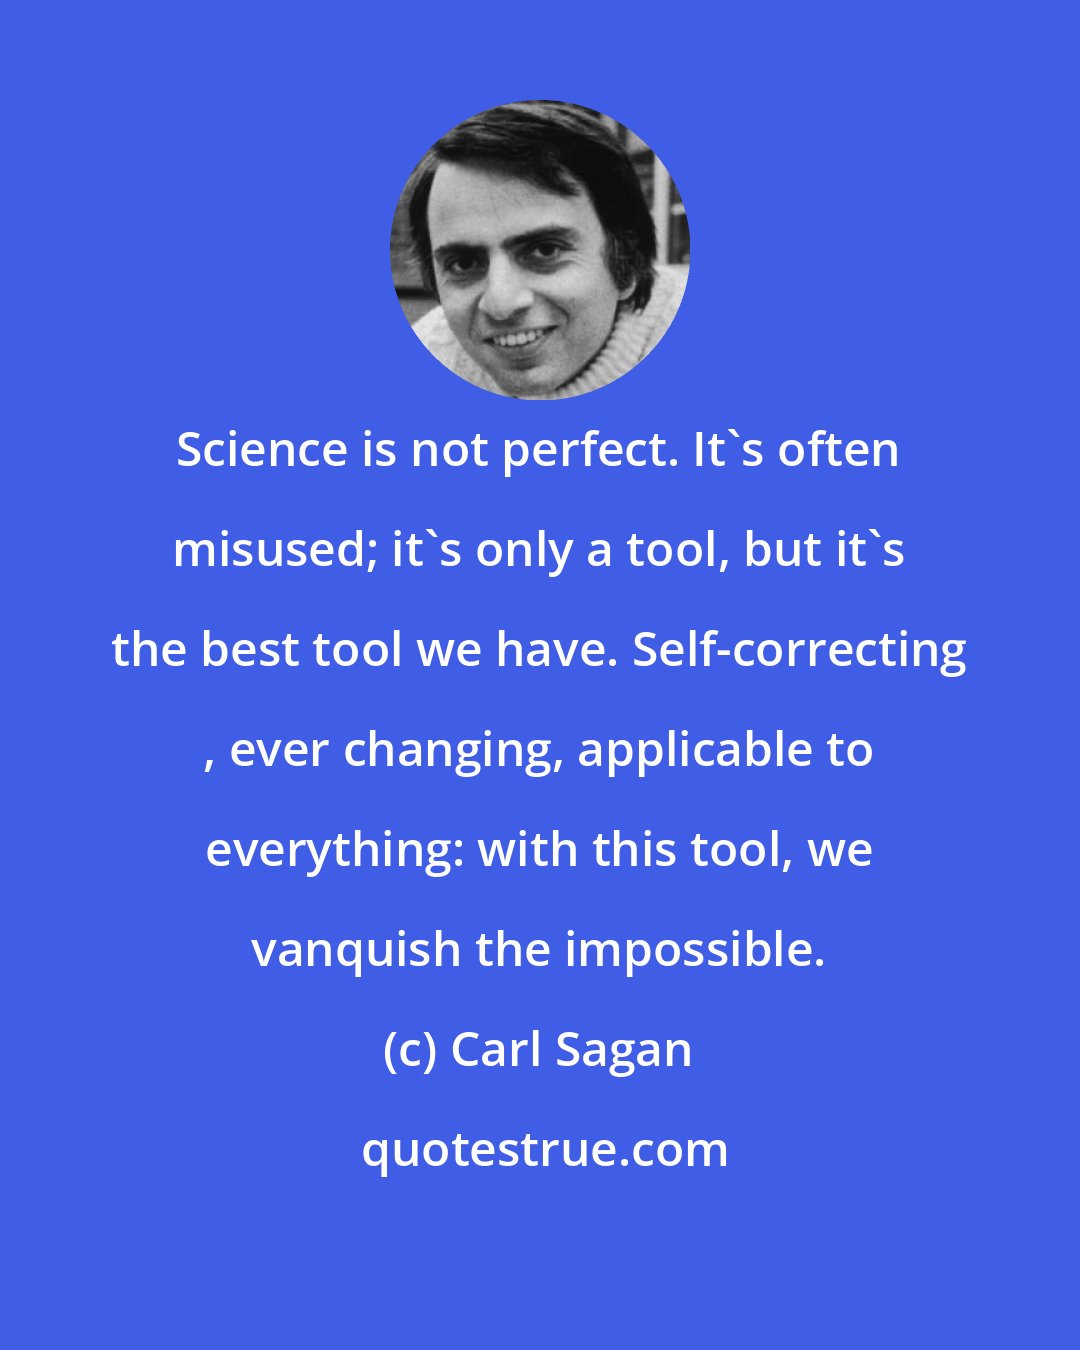 Carl Sagan: Science is not perfect. It's often misused; it's only a tool, but it's the best tool we have. Self-correcting , ever changing, applicable to everything: with this tool, we vanquish the impossible.